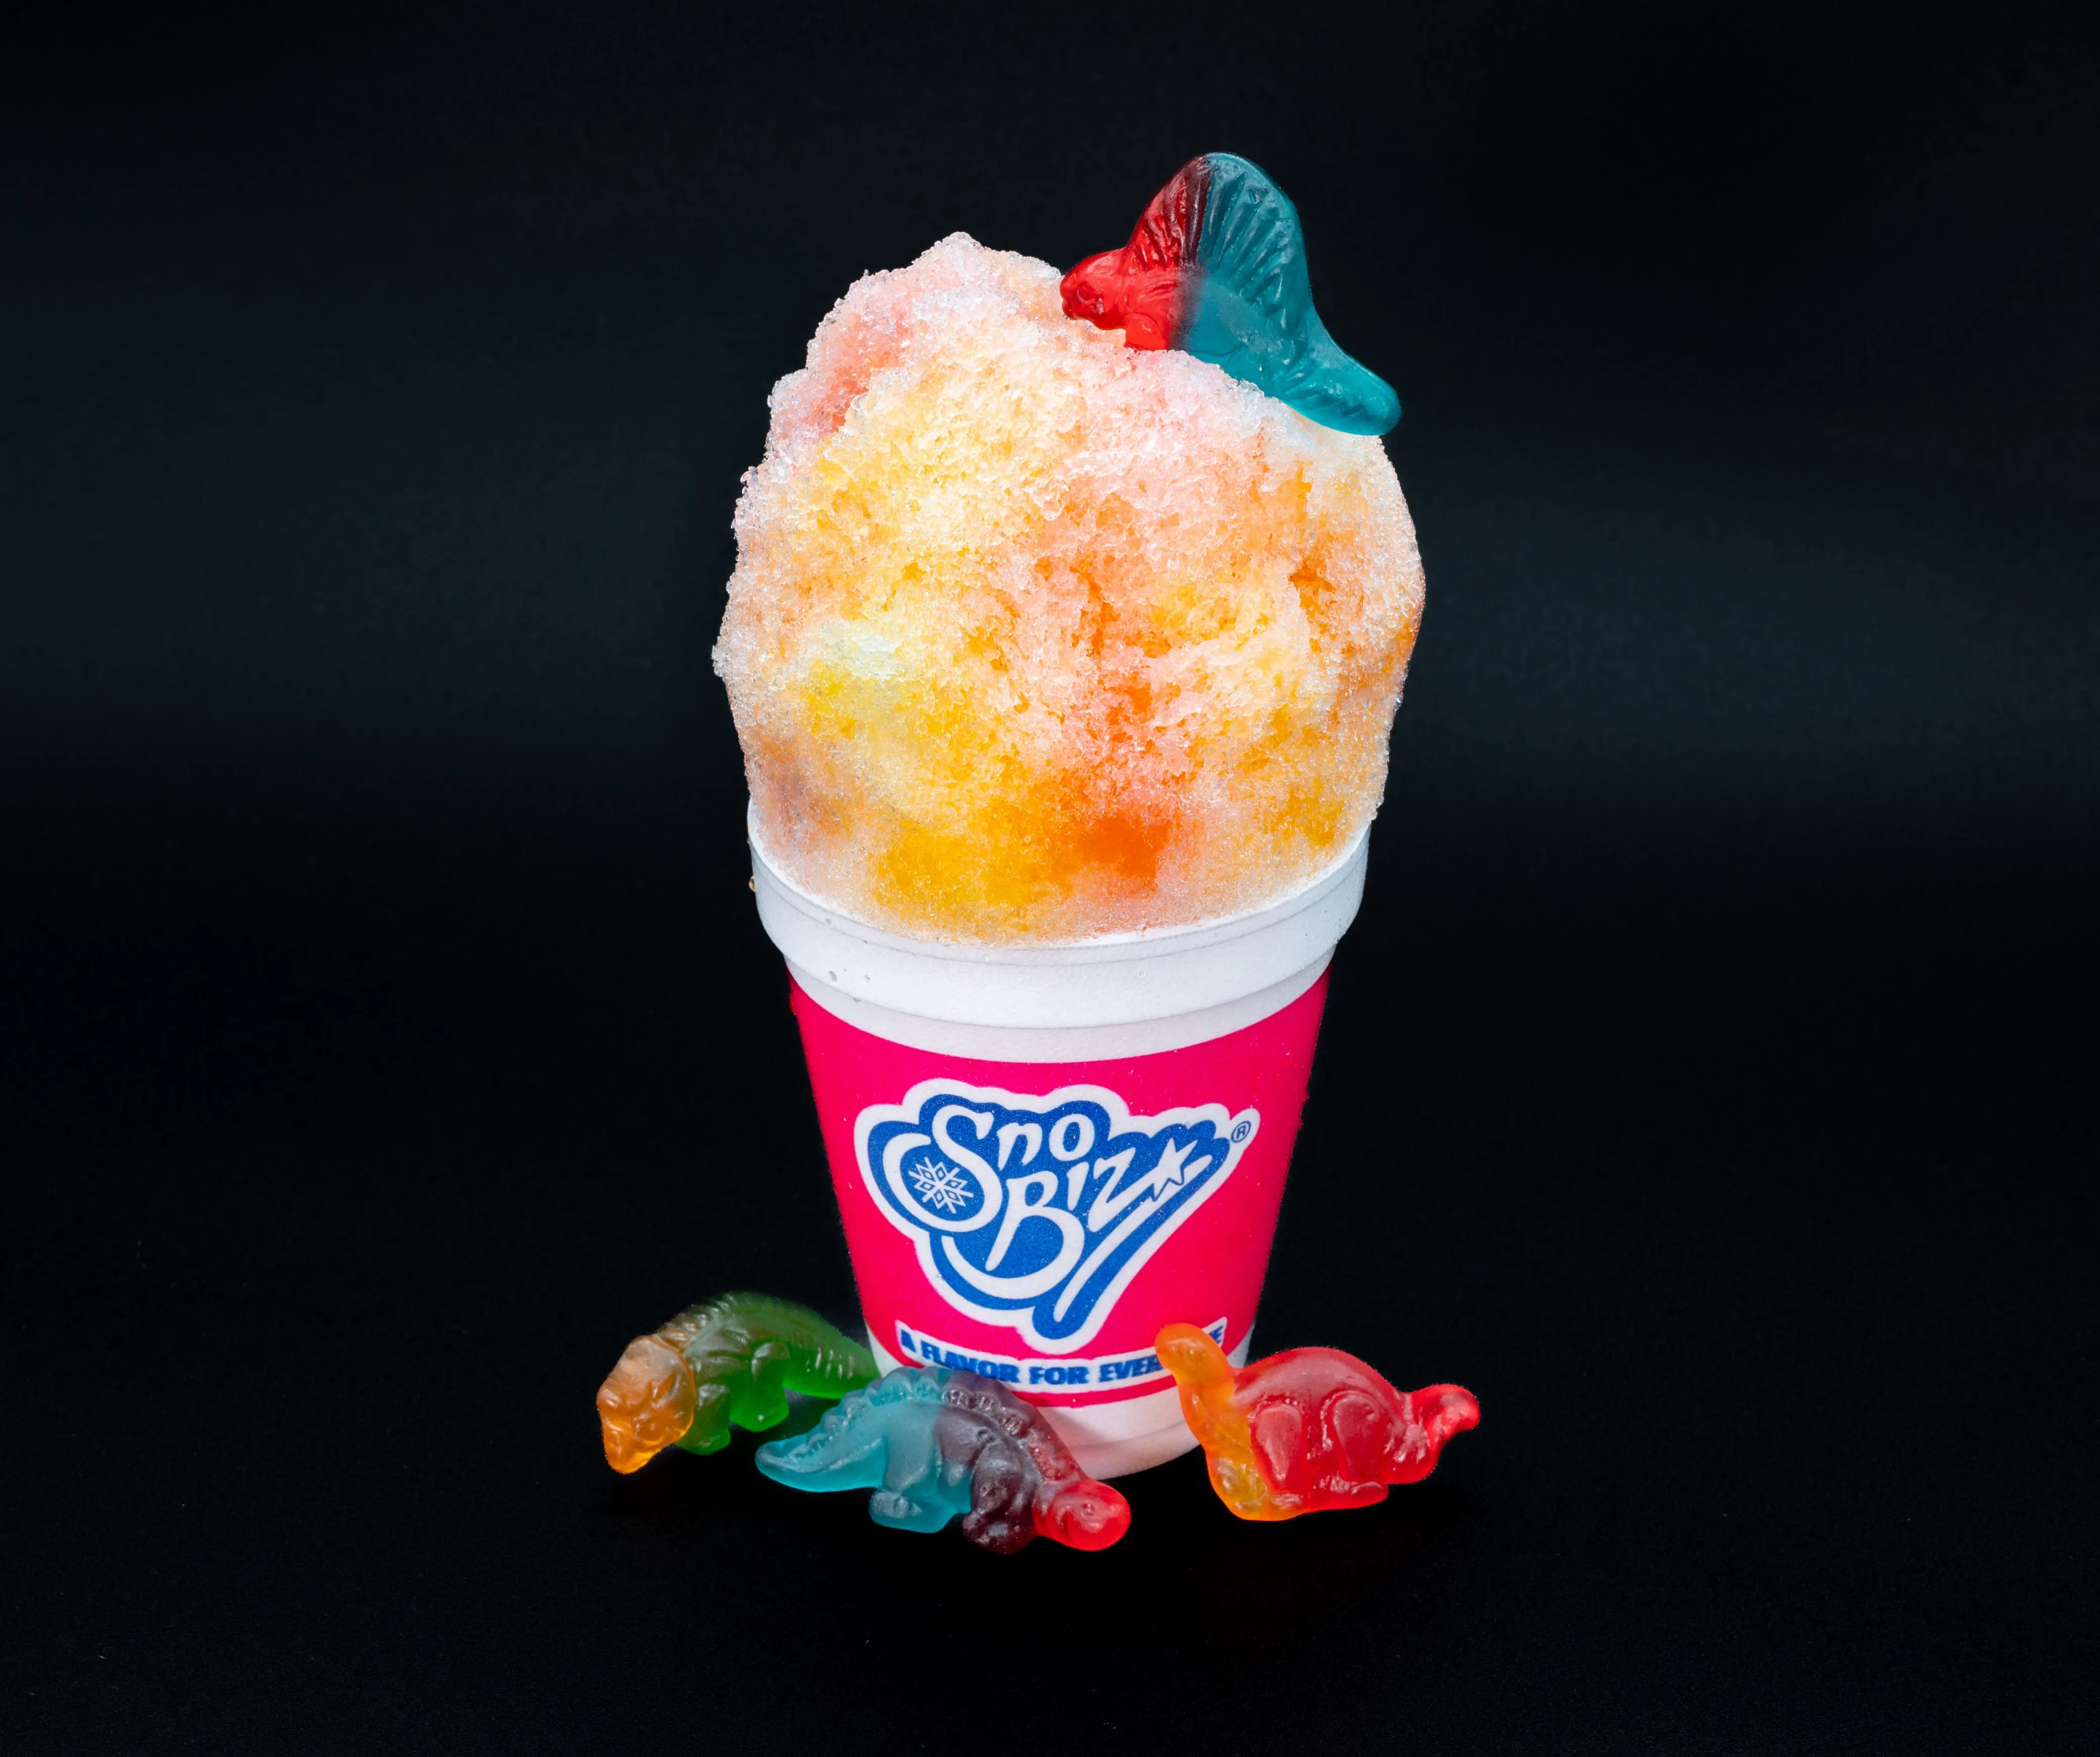 Colorful shaved ice in a Sno Biz cup with gummy sharks, isolated on a black background.